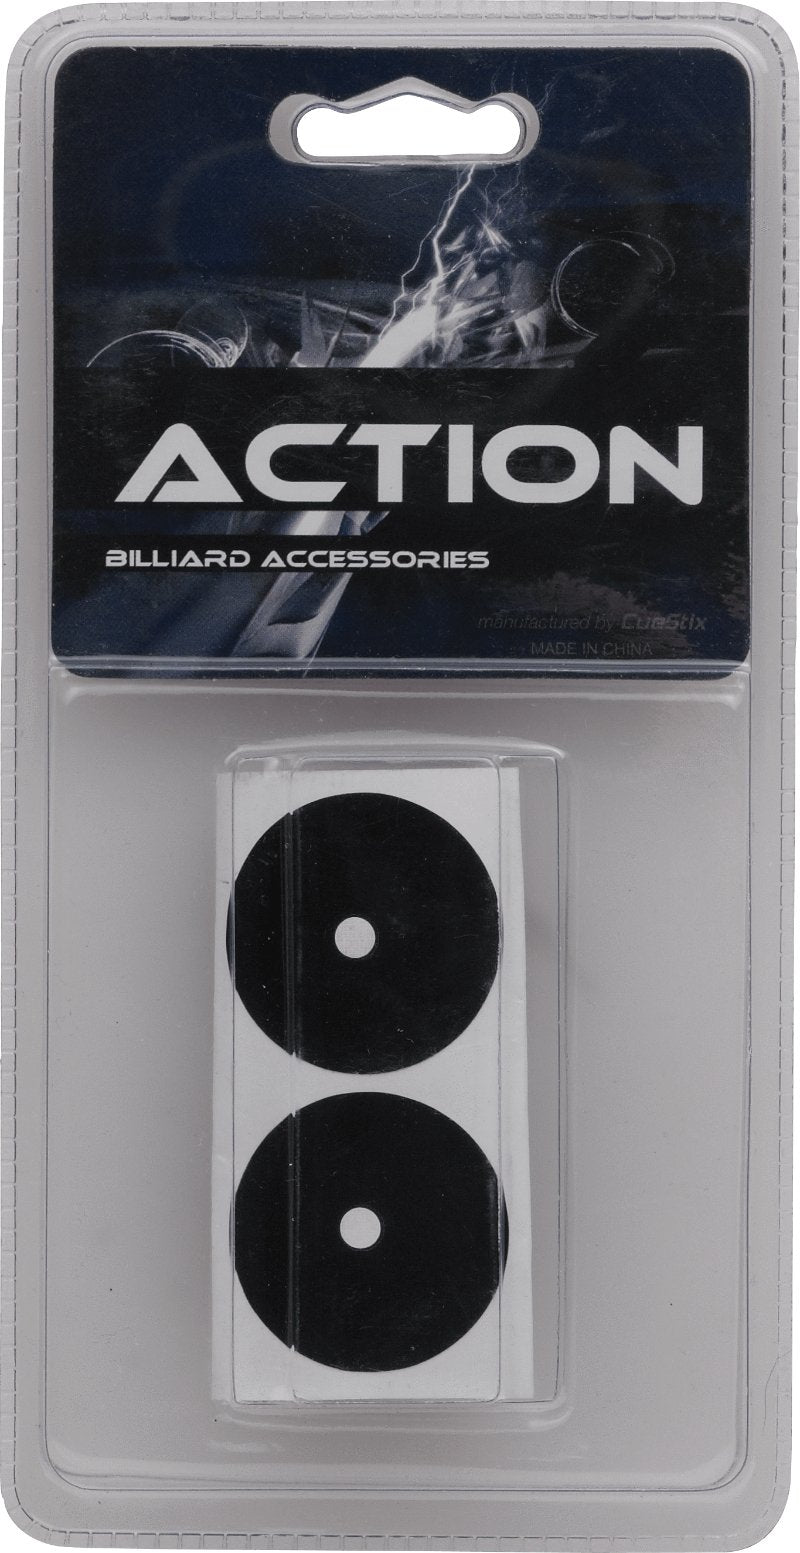 Action TPTSP Table Spots in Blister Pack - Billiard_And_Pool_Center